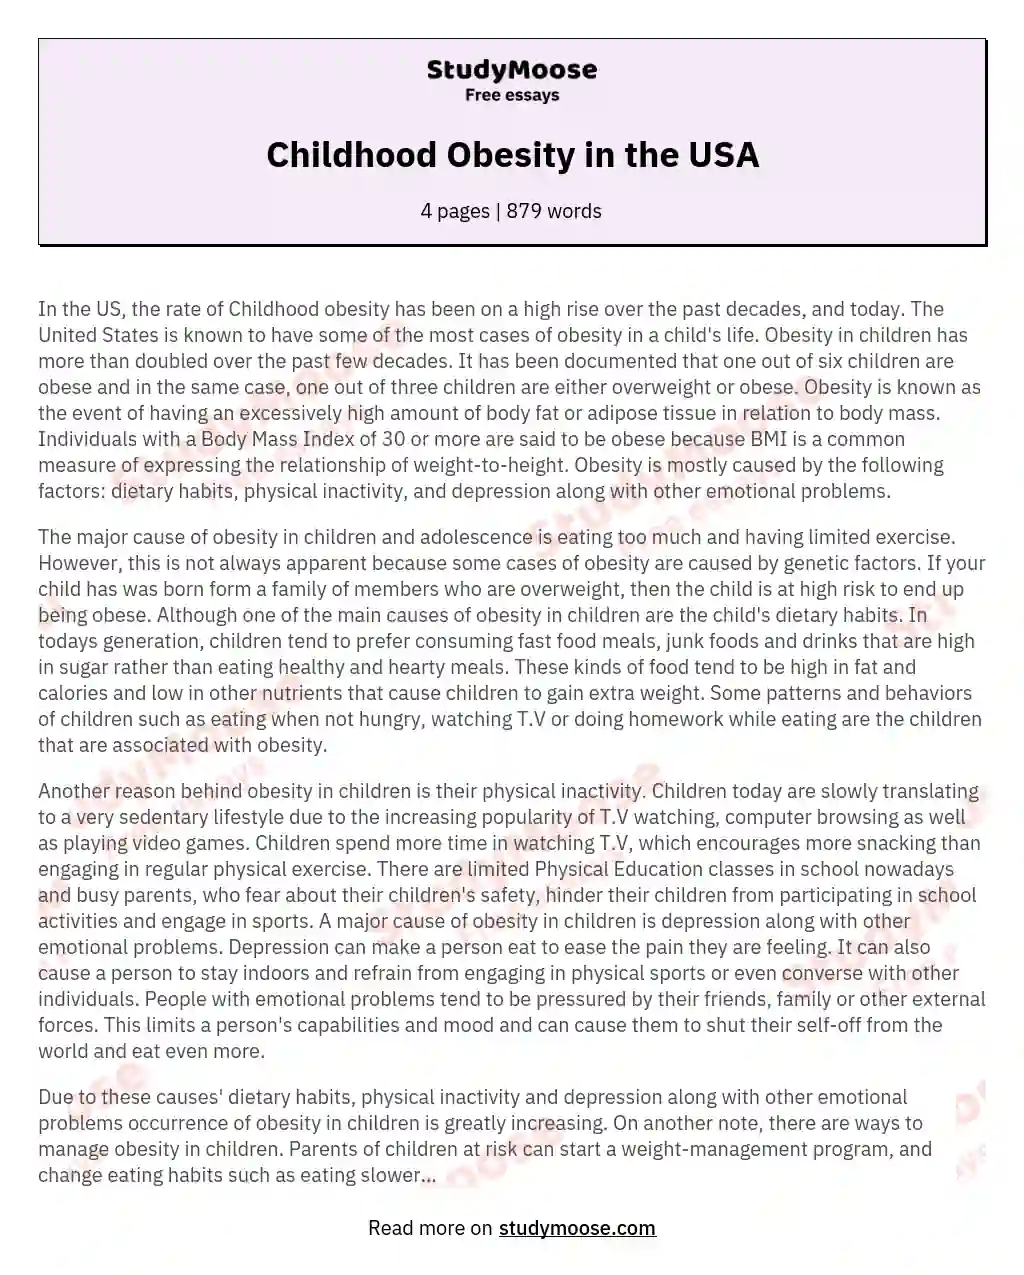 Childhood Obesity in the USA essay